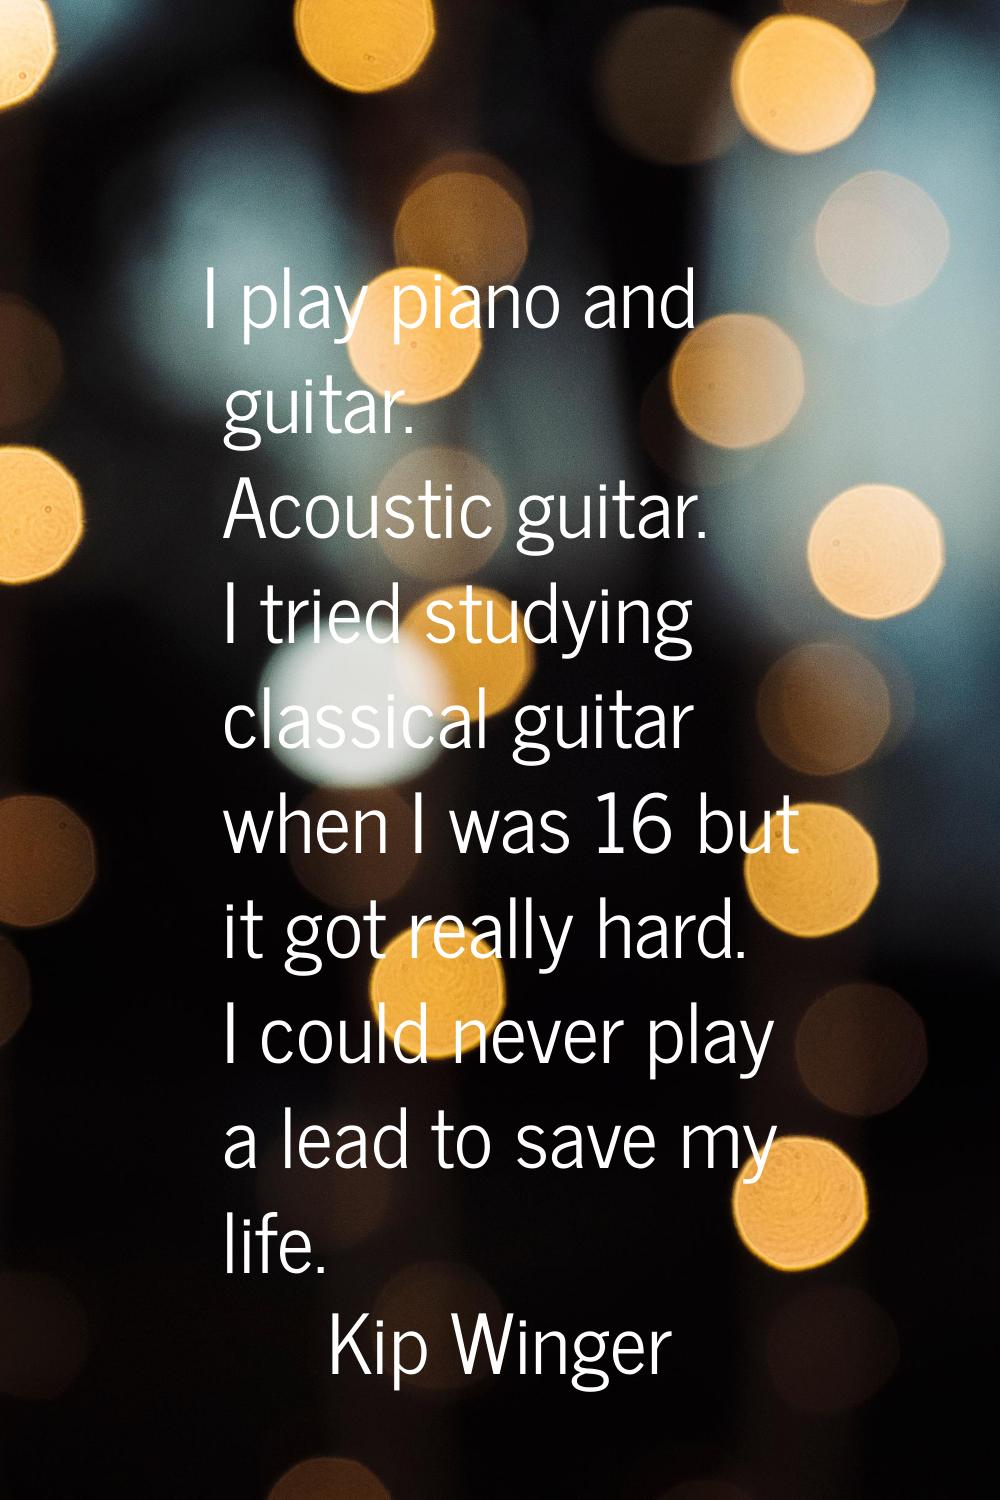 I play piano and guitar. Acoustic guitar. I tried studying classical guitar when I was 16 but it go